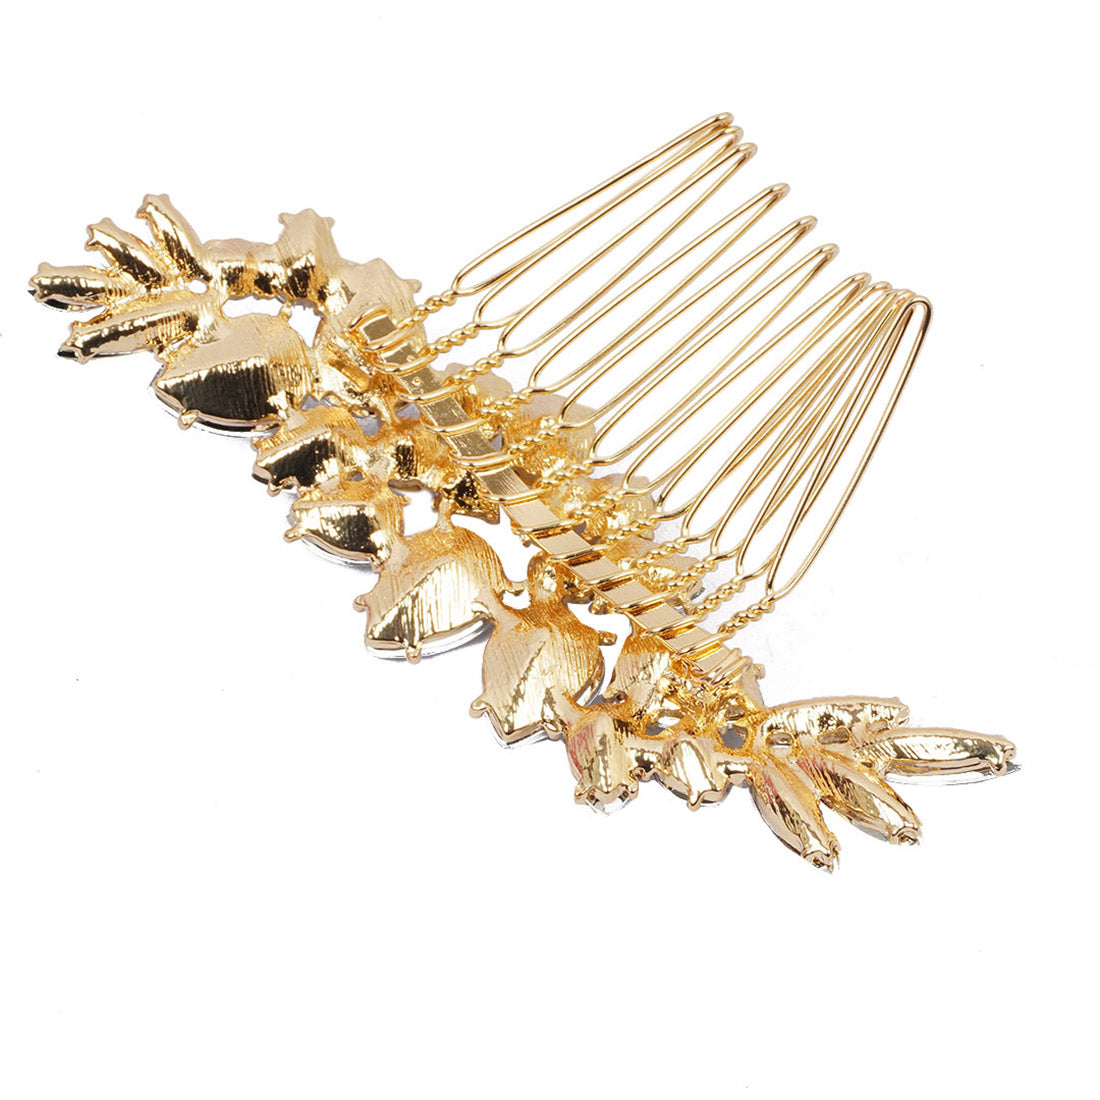 Elevate Your Look with our Crystal Hair Comb